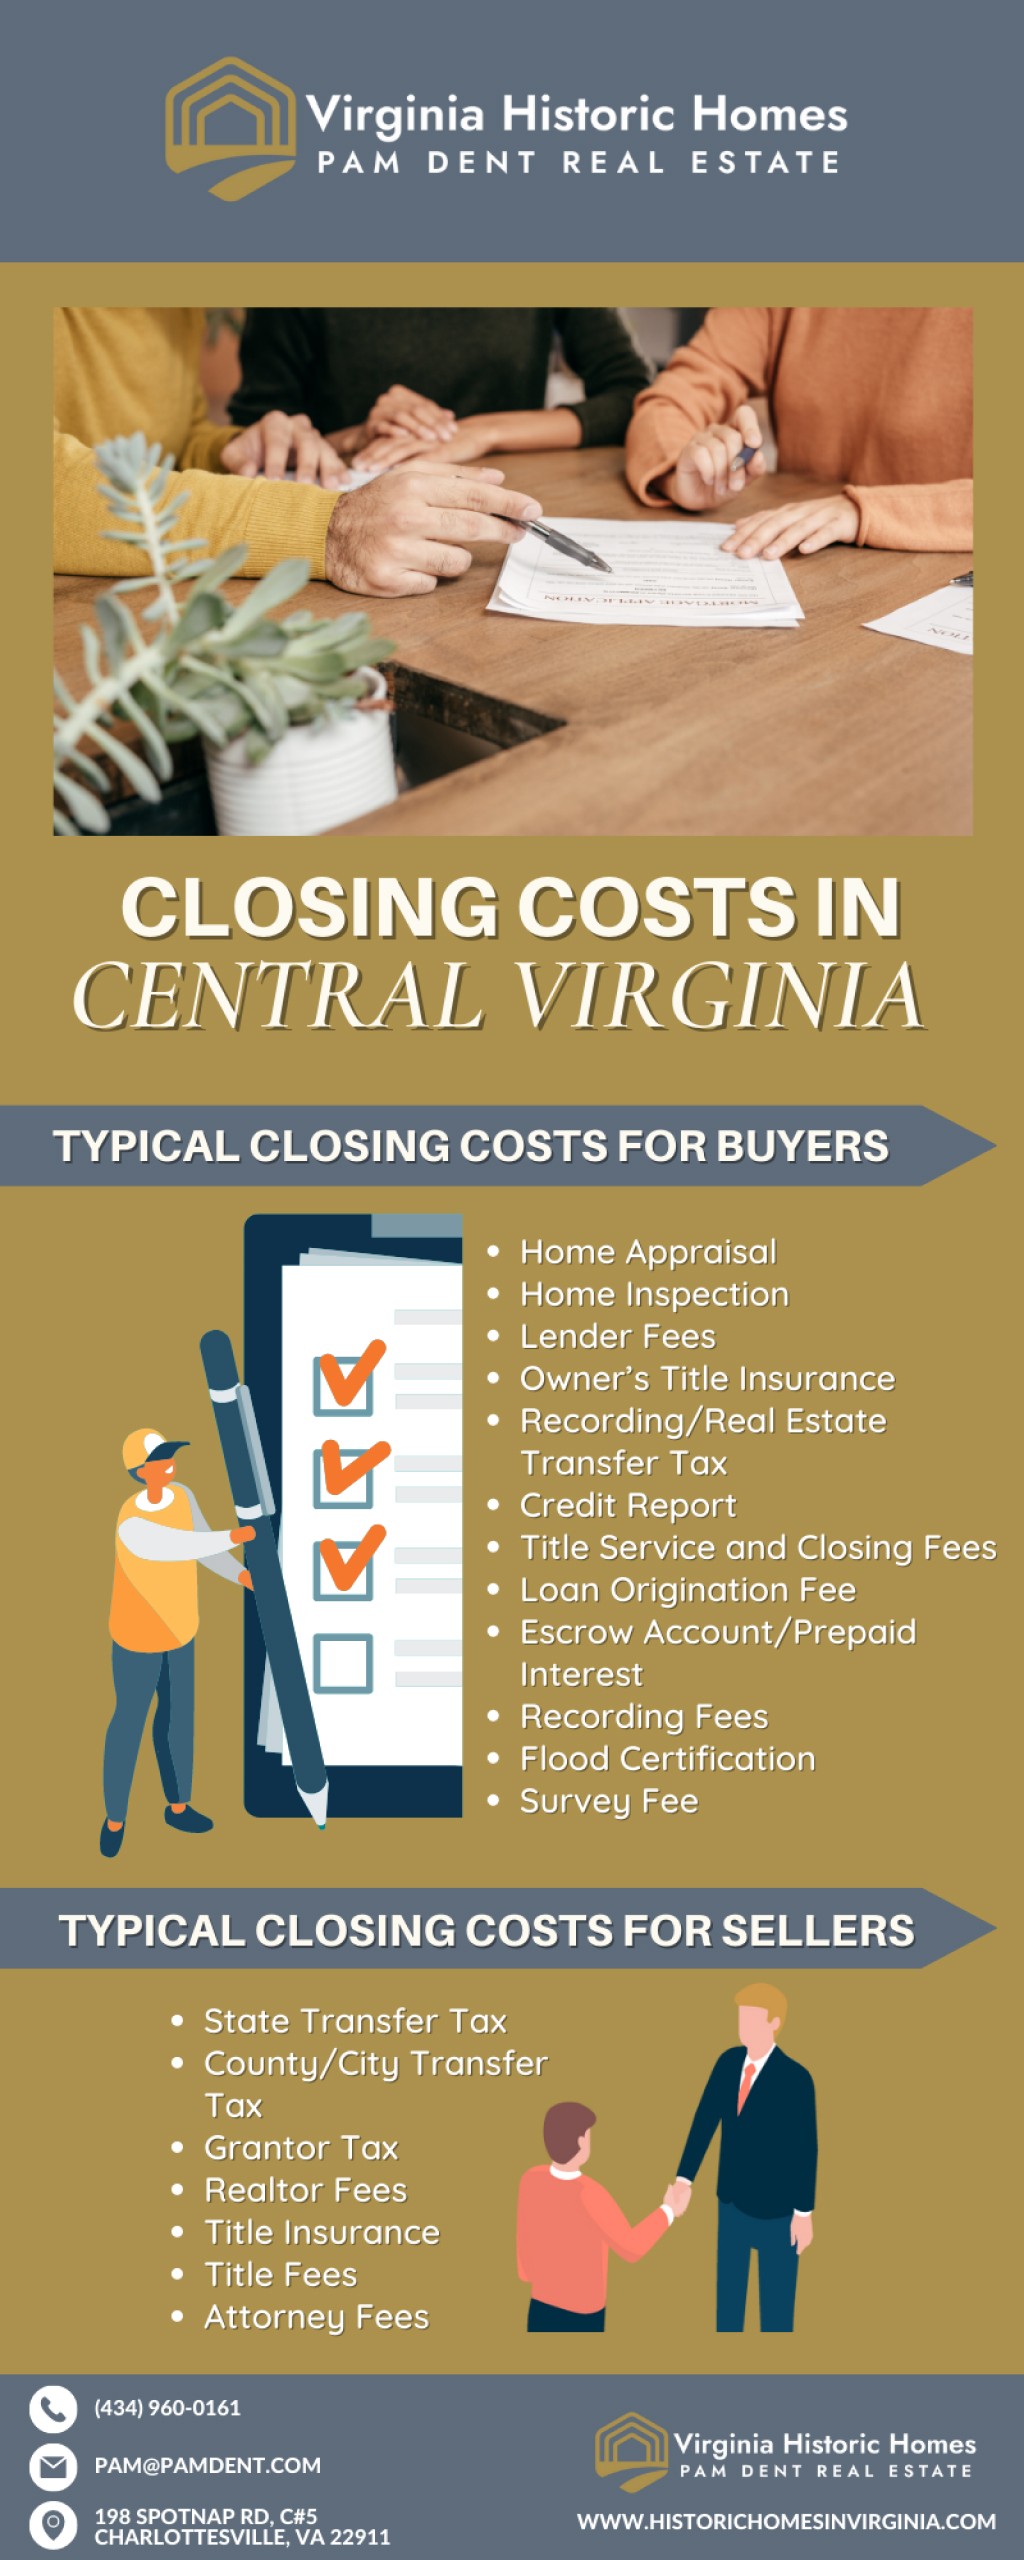 Closing Costs for Historic Houses in Central VA